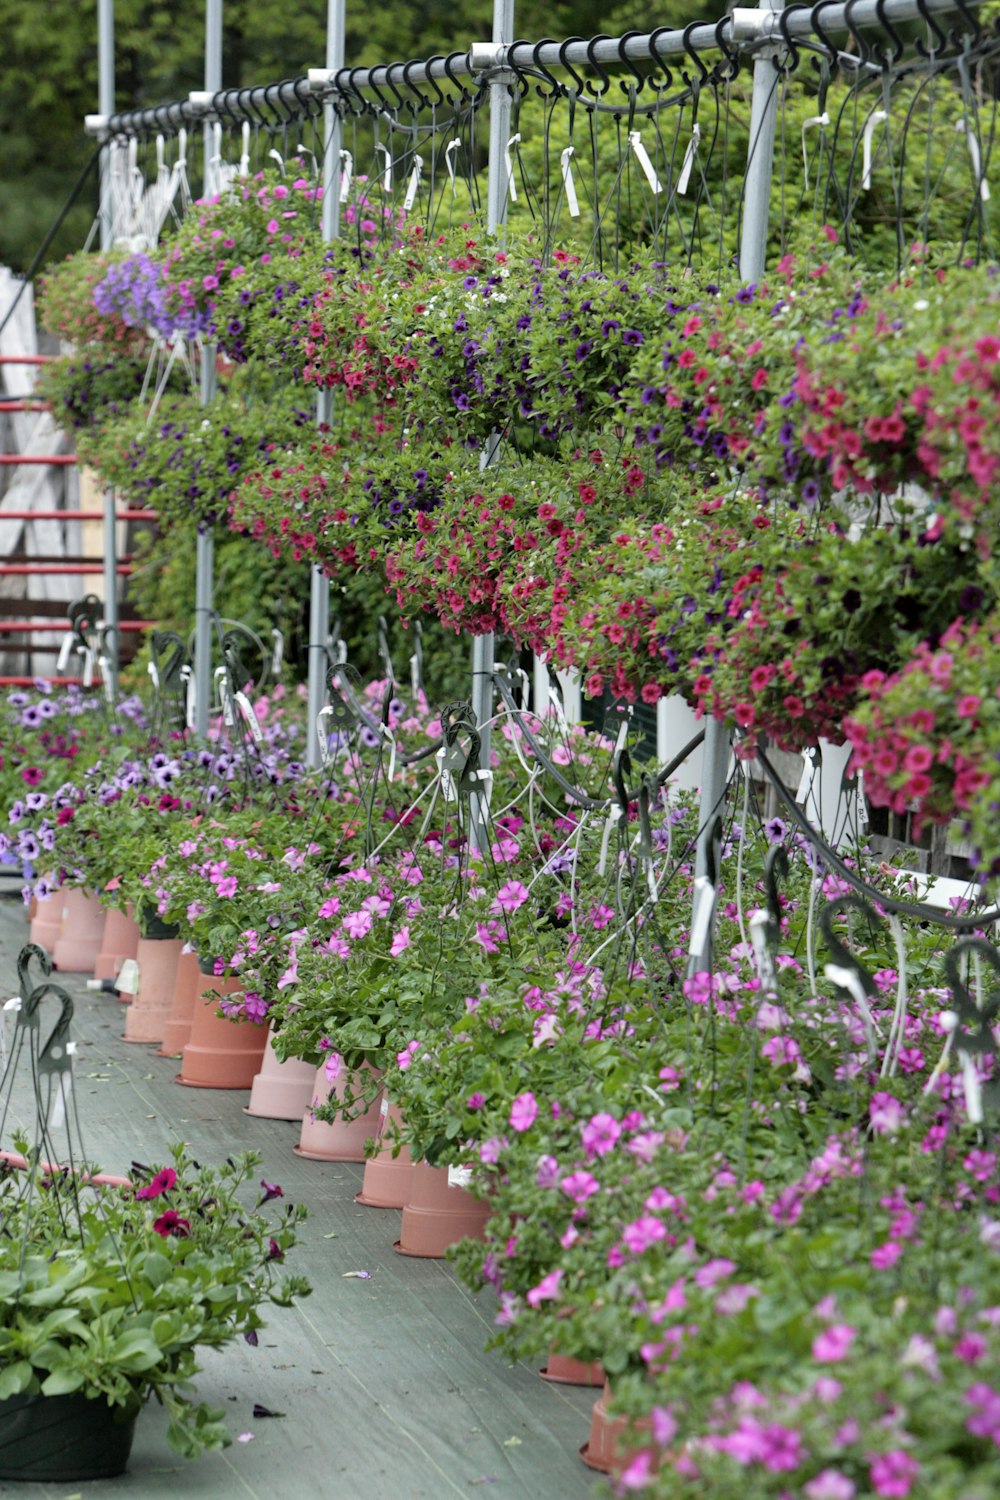 a row of potted plants with pink and purple flowers